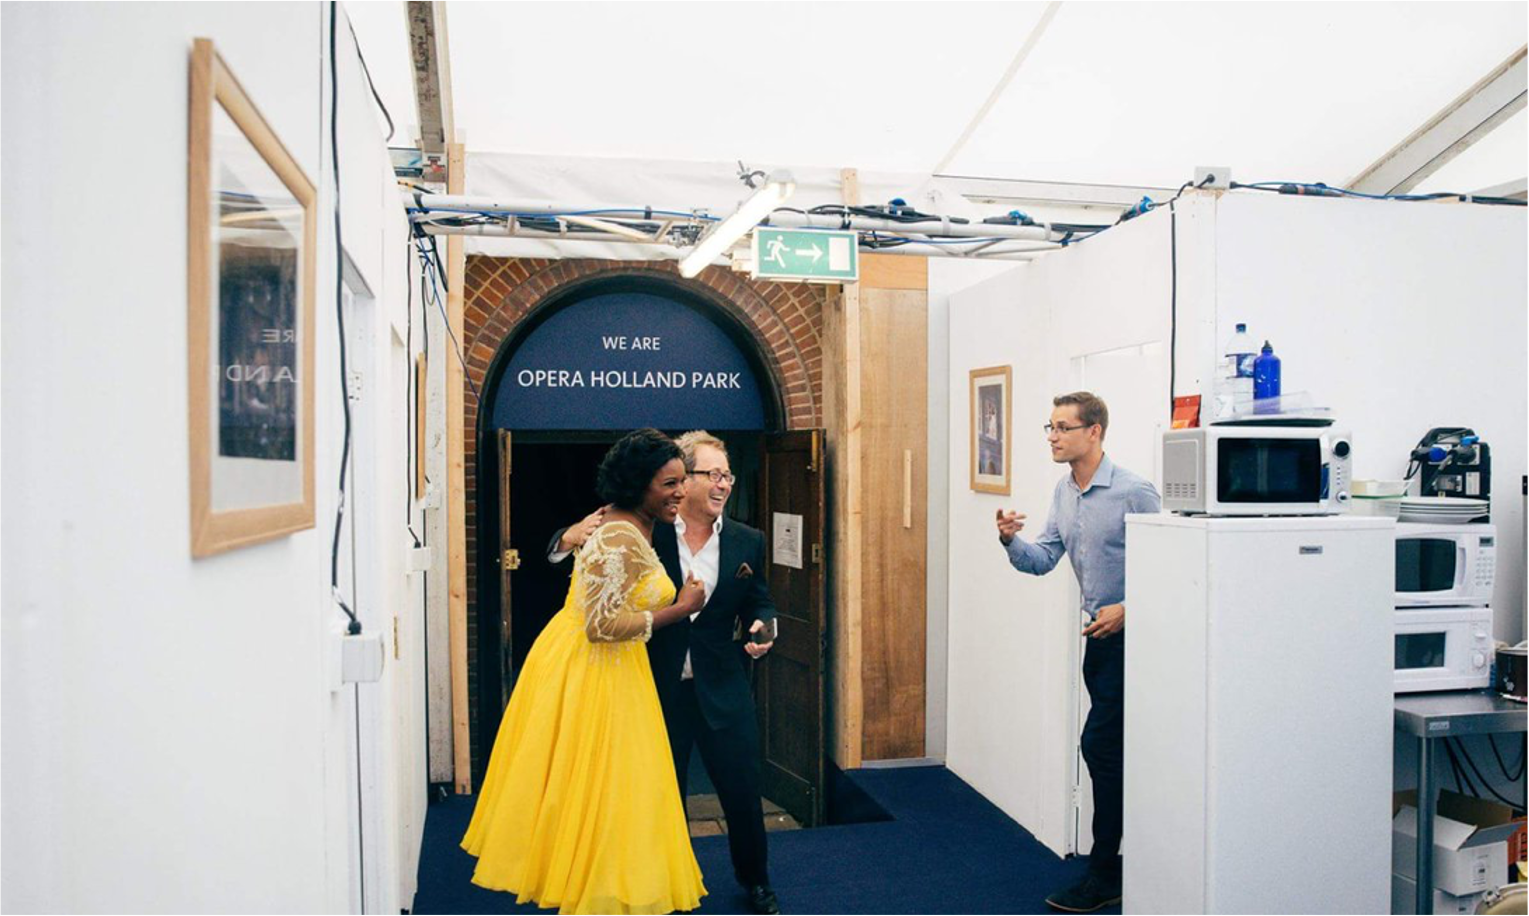  Sharing a joke backstage with Elizabeth Llewellyn and James Clutton 